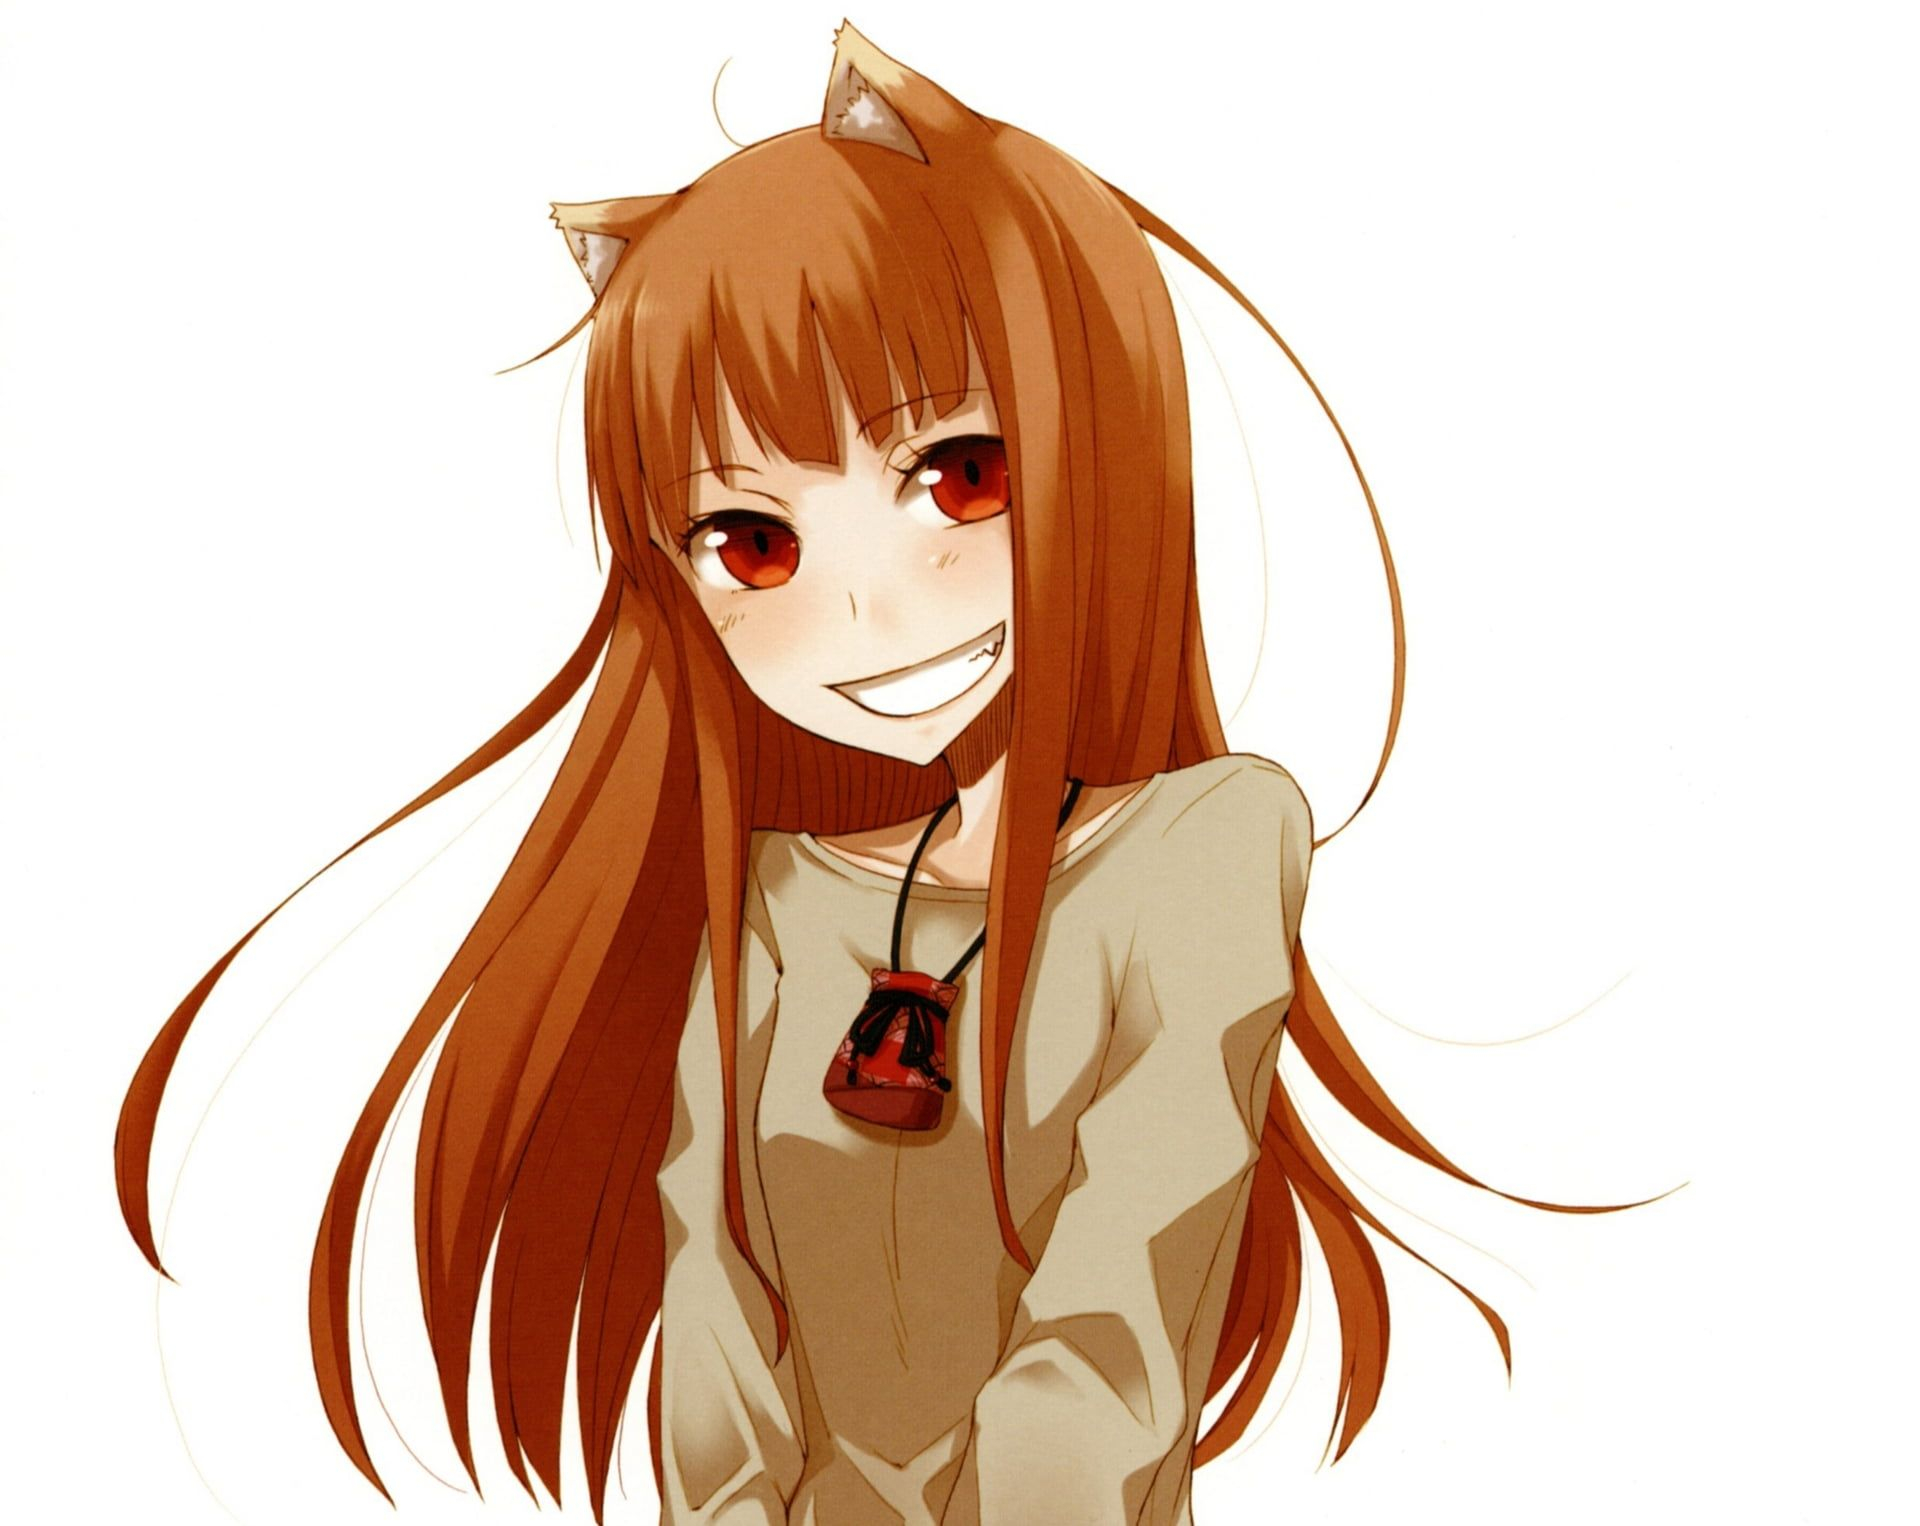 1920x1526 Anime Spice and Wolf Holo (Spice and Wolf) #1080P #wallpaper #hdwallpaper #desktop | Spice and wolf, Spice and wolf holo, Anime